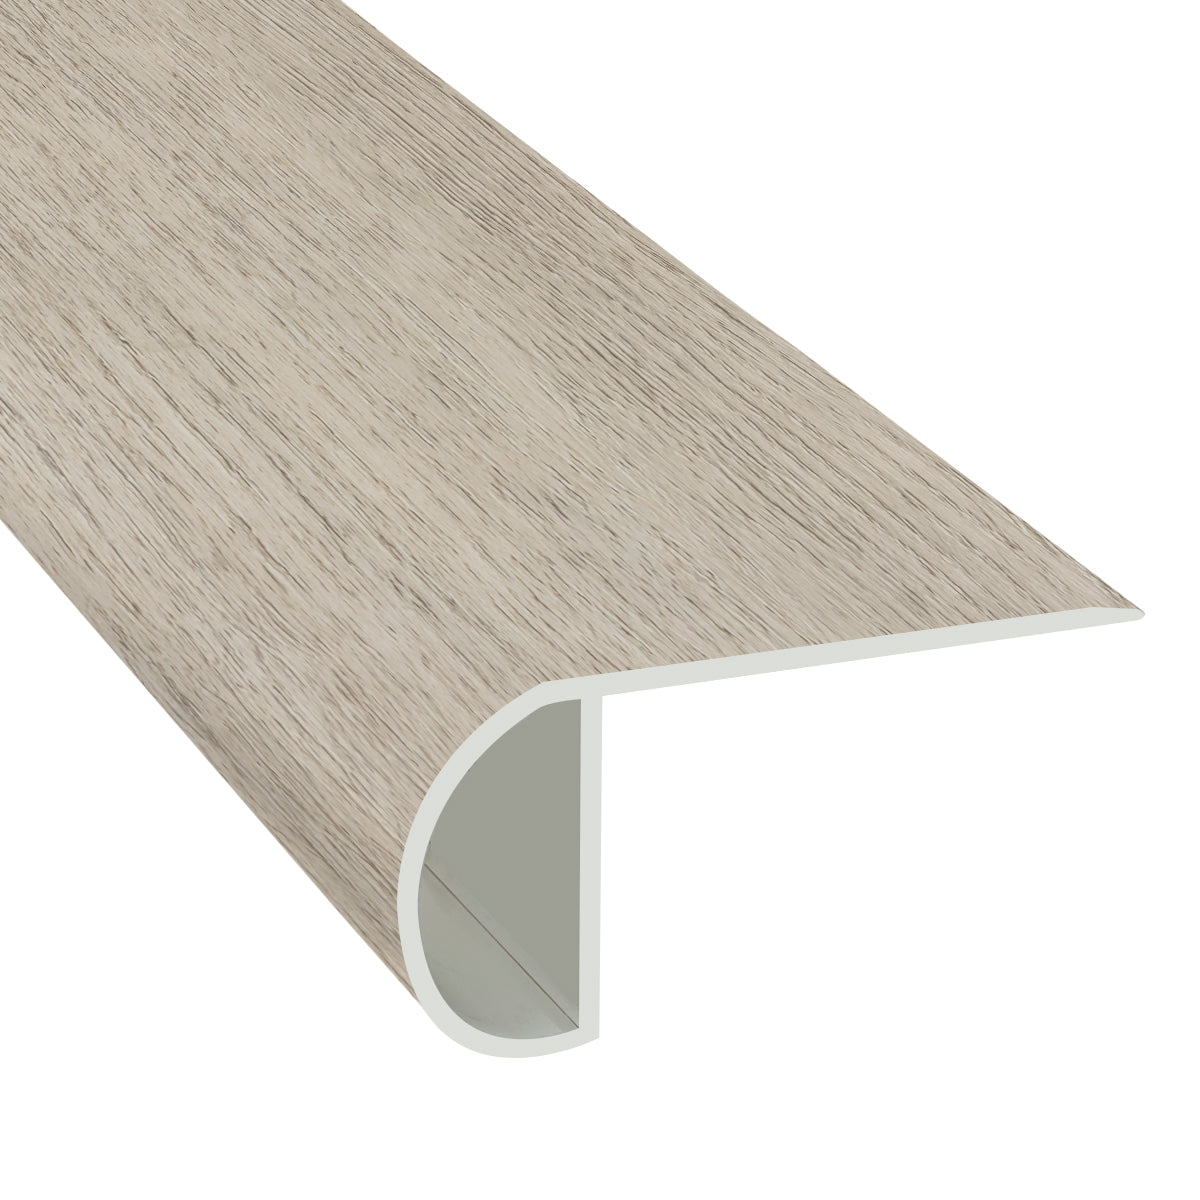 Colorado 1.03 in. Thick x 2.23 in. Width x 94 in. Length Vinyl Overlap Stair Nose Molding